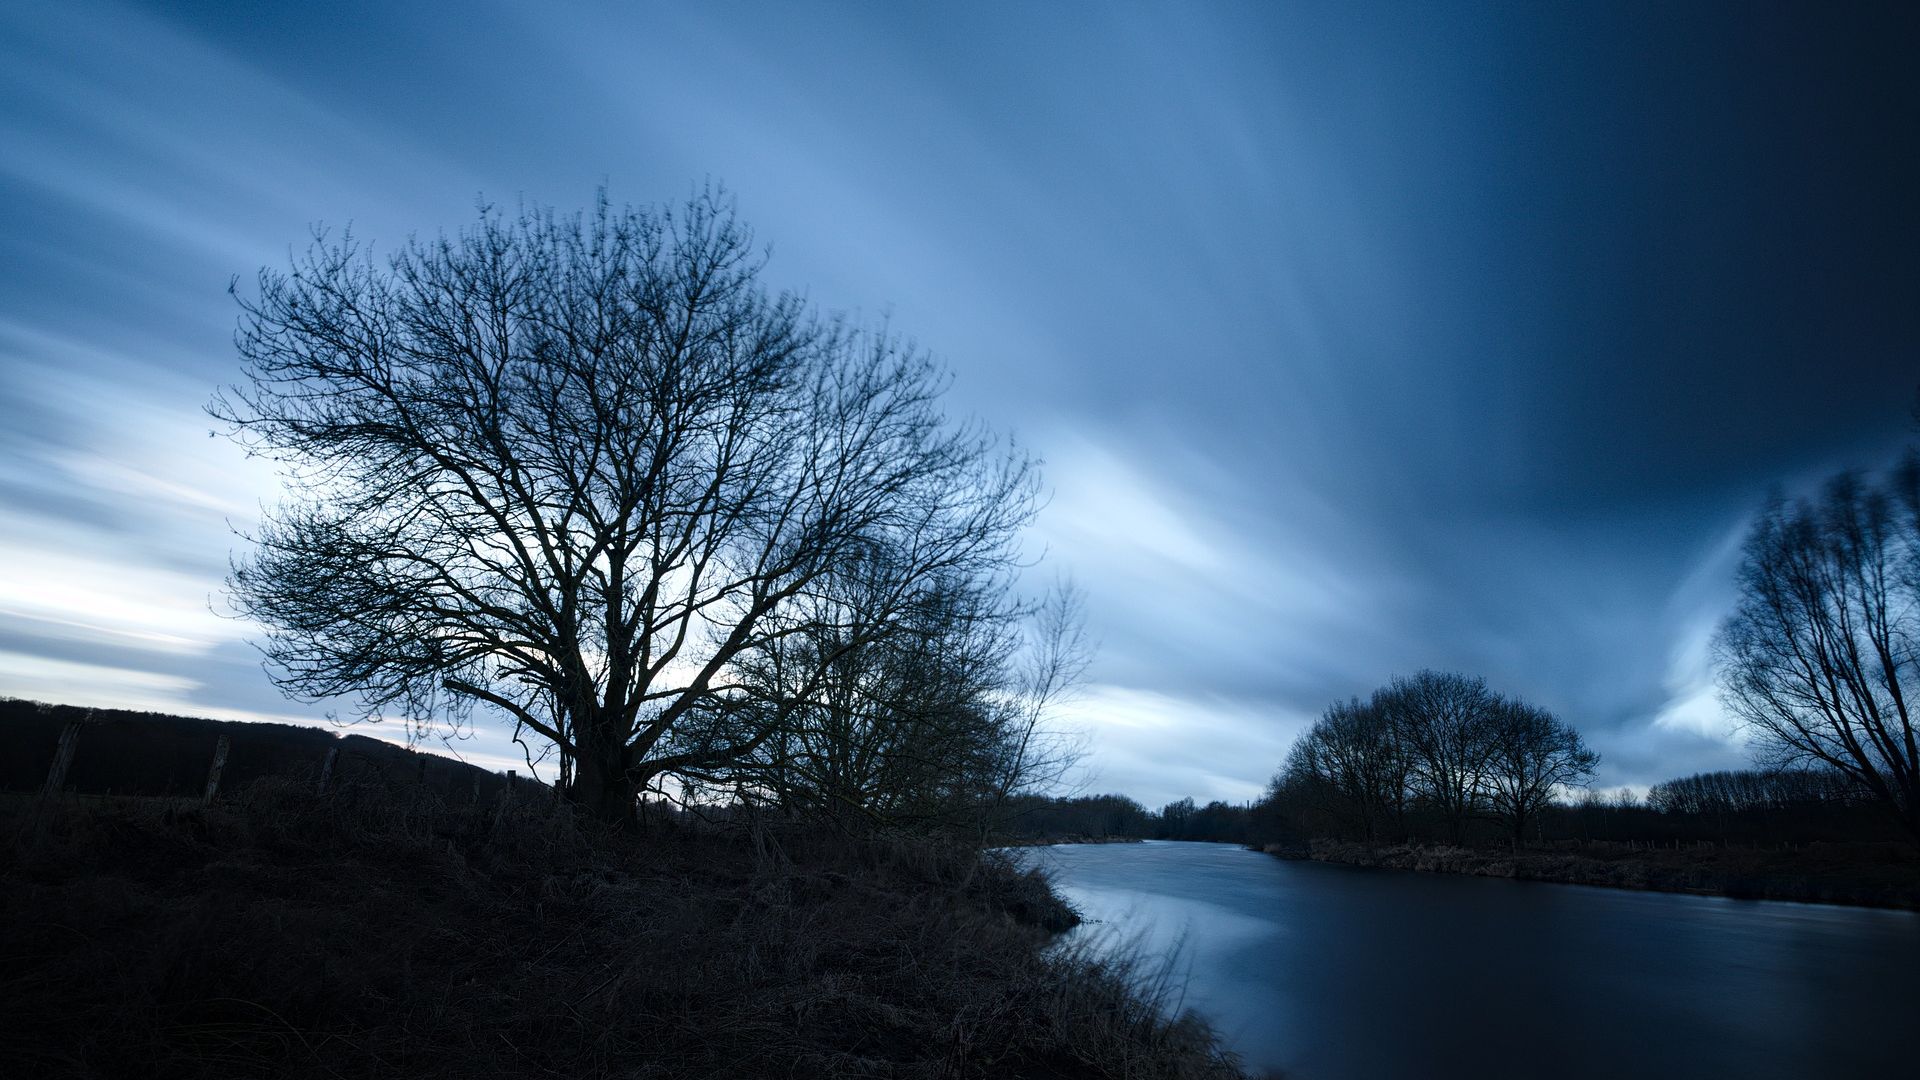 Desktop Wallpaper River, Water, Tree, Night, Nature, Hd Image, Picture,  Background, Luyn02